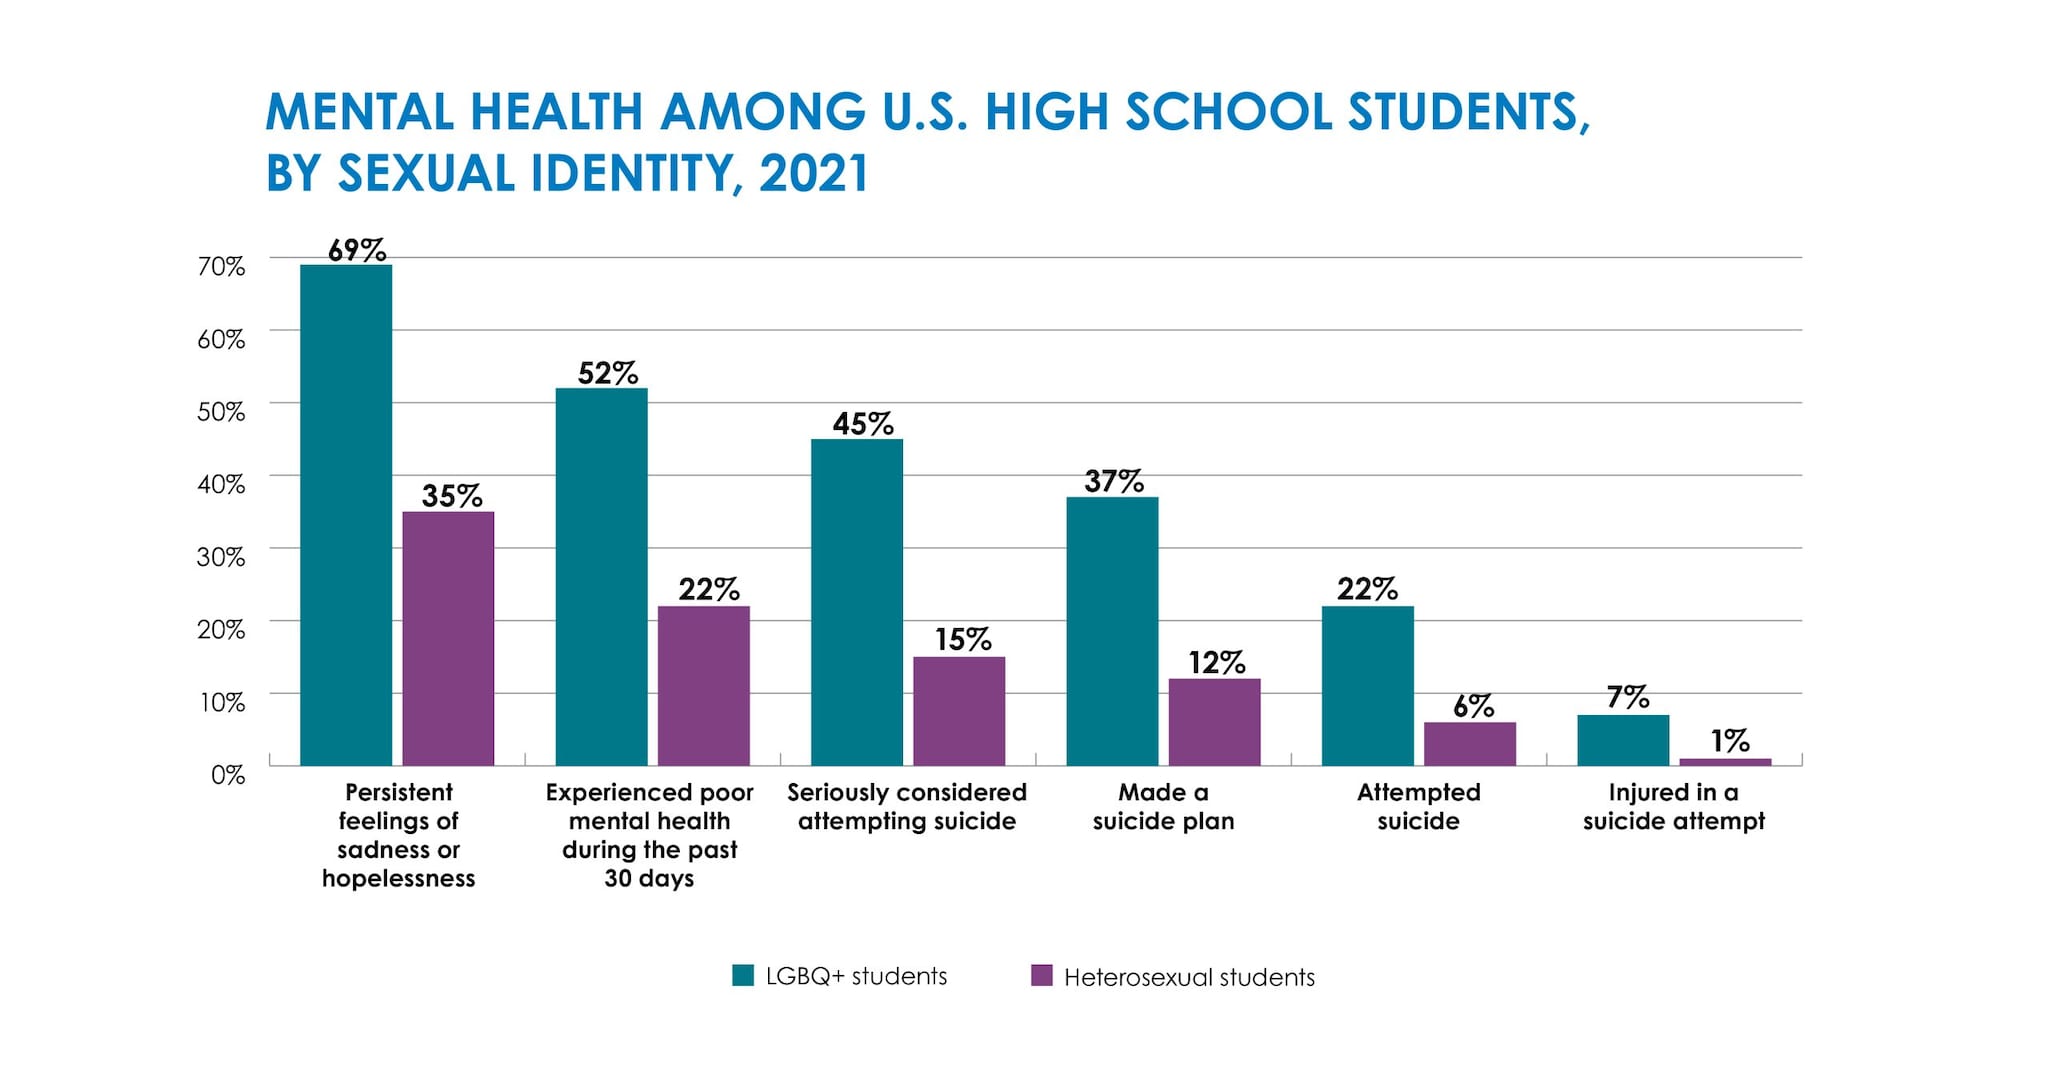 A grouped bar chart showing 2021 U.S. student data on mental health by sexual identity, with the highest levels reported among LGBQ+ students across all indicators